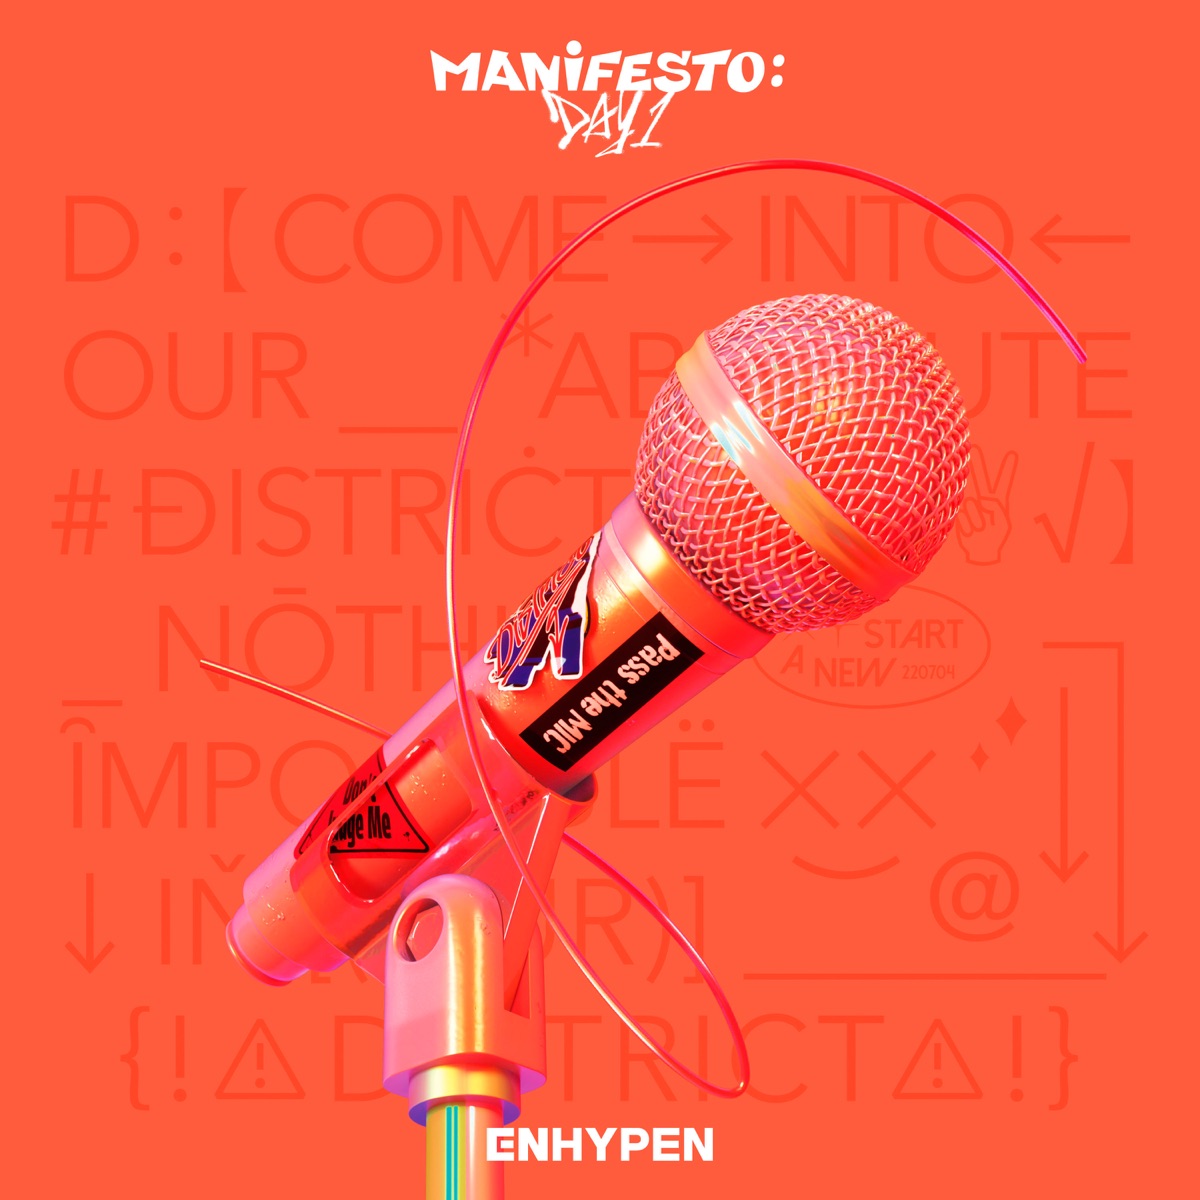 Cover art for『ENHYPEN - TFW (That Feeling When)』from the release『MANIFESTO : DAY 1』